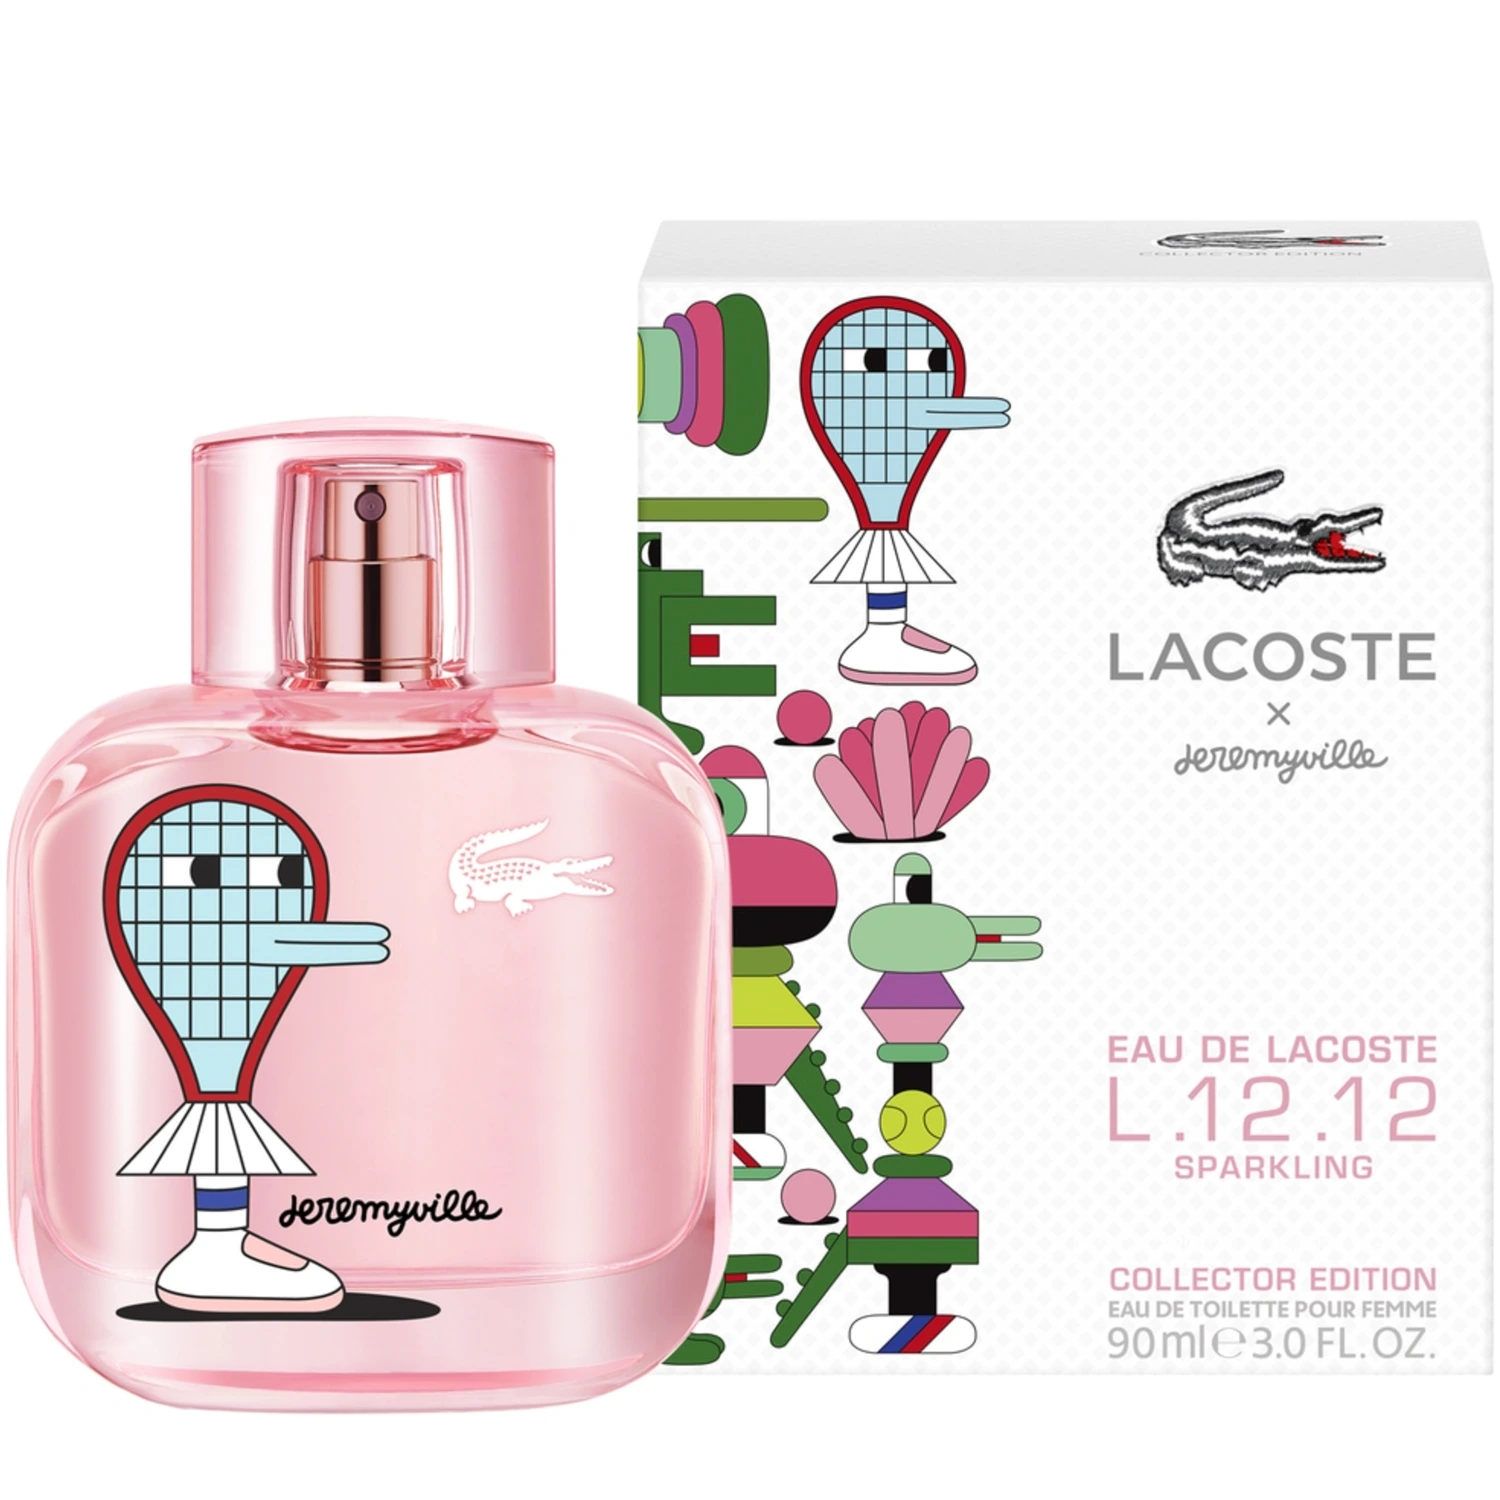 <p>Lacoste X Jeremyville L.12.12 Pour Elle Sparkling offers a unique take on the classic elegance of Lacoste. This 3.0 oz EDT for women is a fruity floral scent with top notes of rhubarb jam and pink grapefruit, followed by Arabian jasmine and French macaroon accord. The base notes are patchouli and musk to give you an irresistible aroma. Bring your unique style to the forefront with this exclusive fragrance.</p>